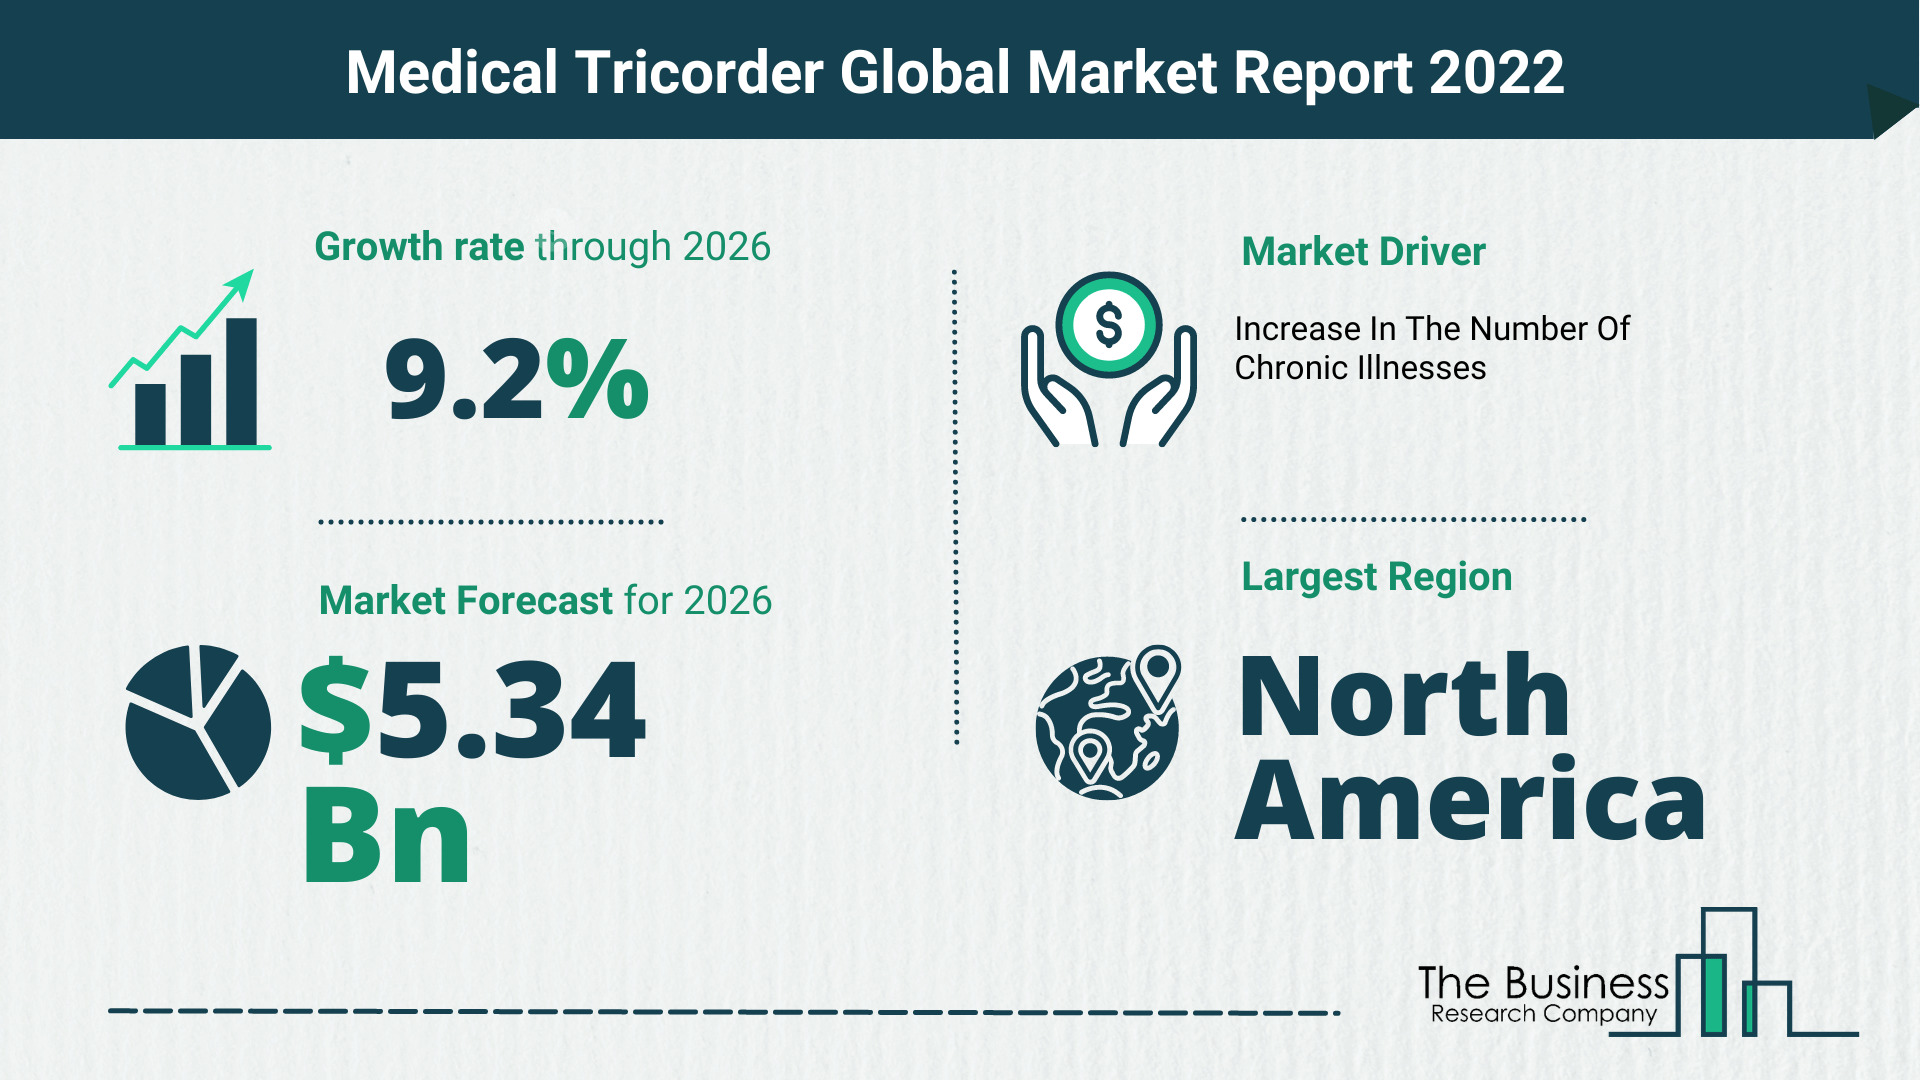 How Will The Medical Tricorder Market Grow In 2022?